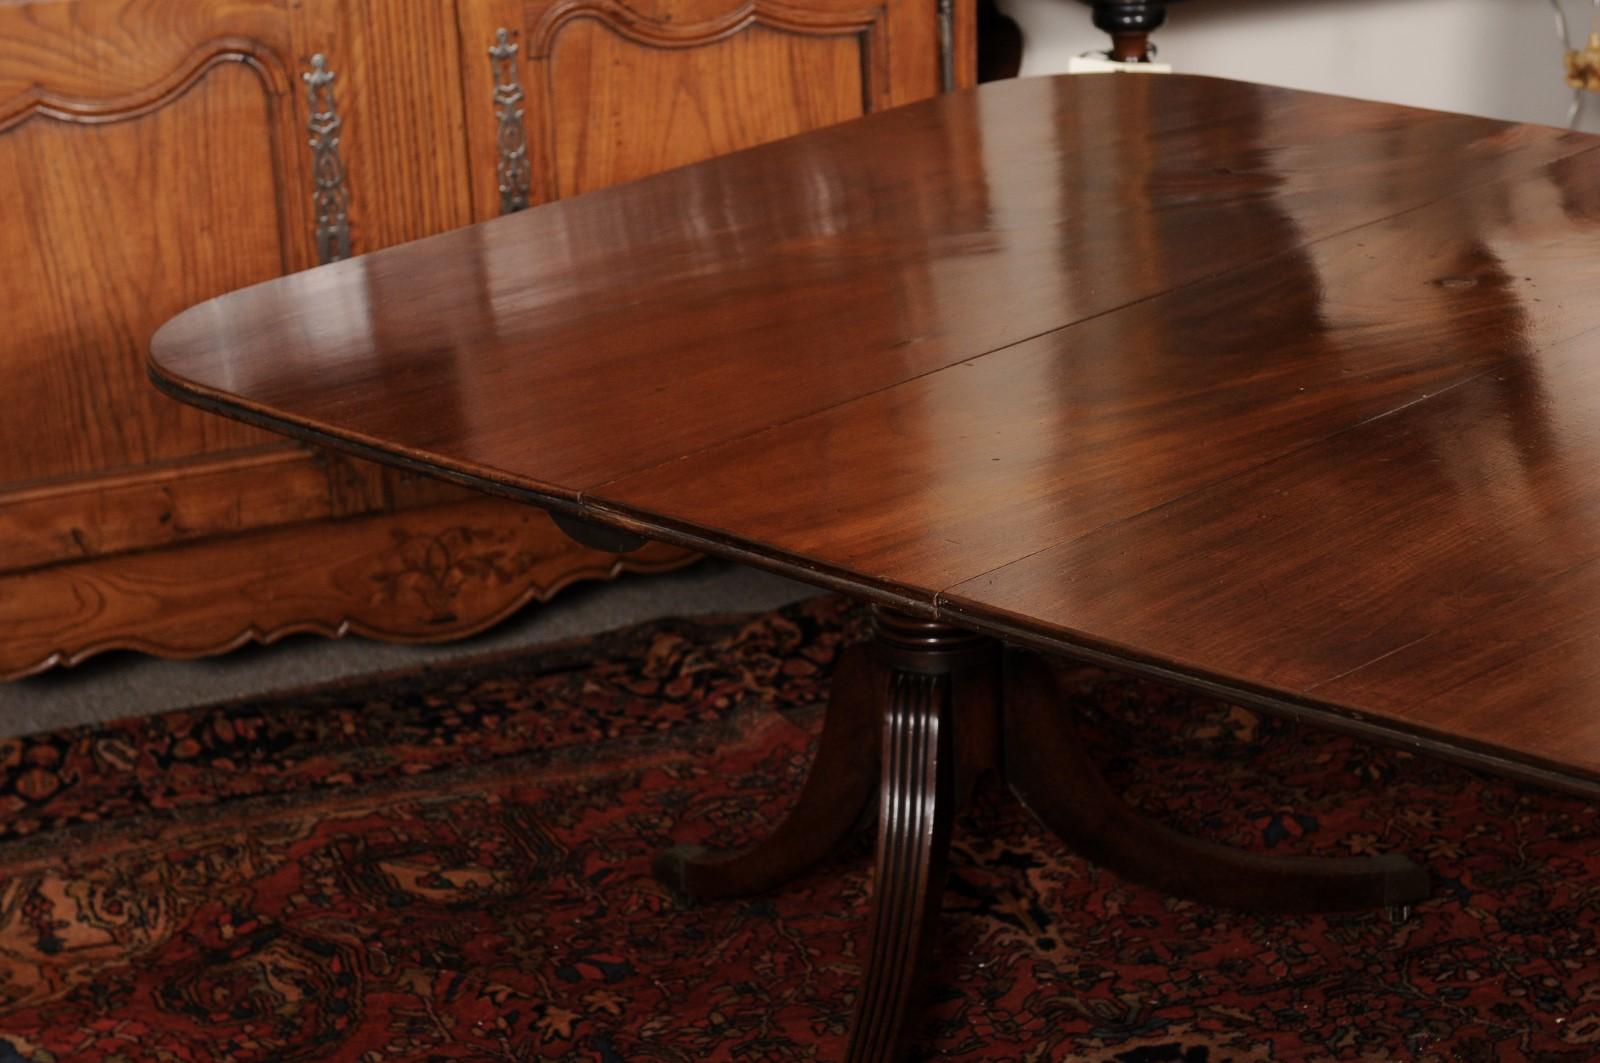 19th Century English Regency Mahogany Double Pedestal Extending Dining Table with 2 Leaves For Sale